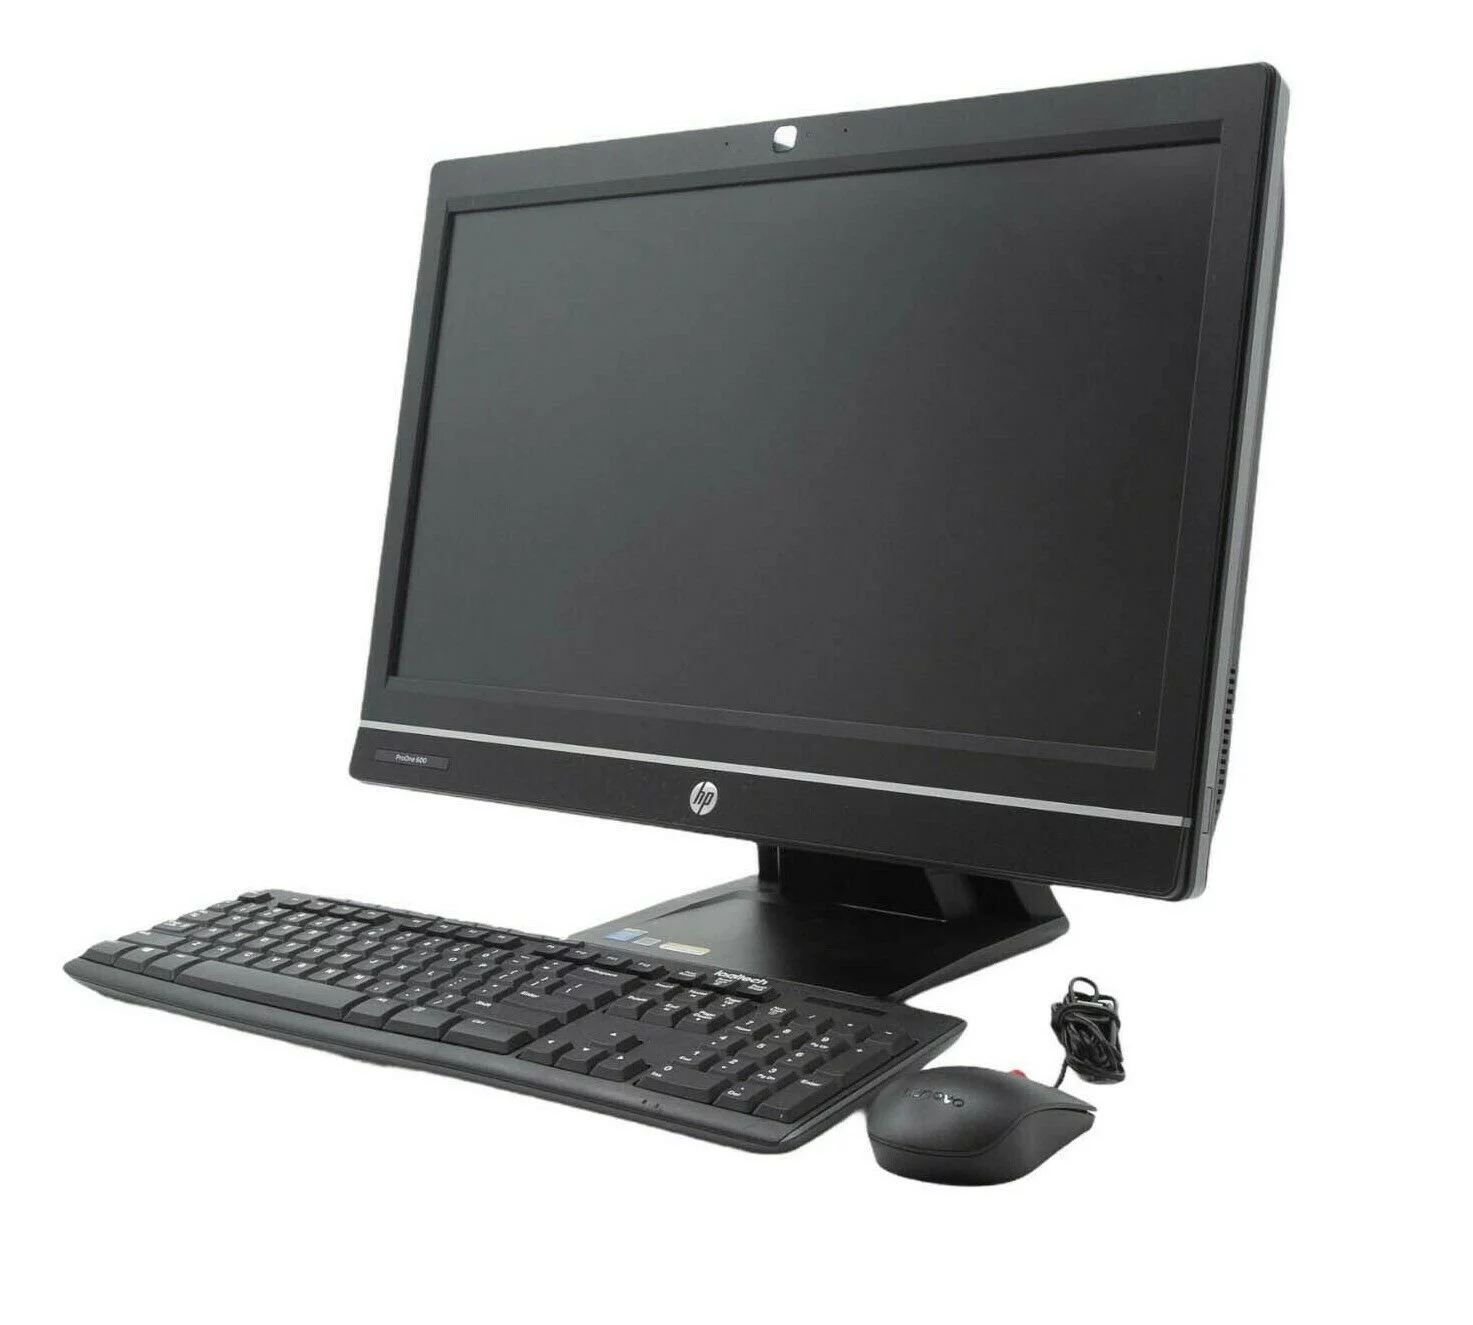 ProOne 600 G1 All-in-One PC